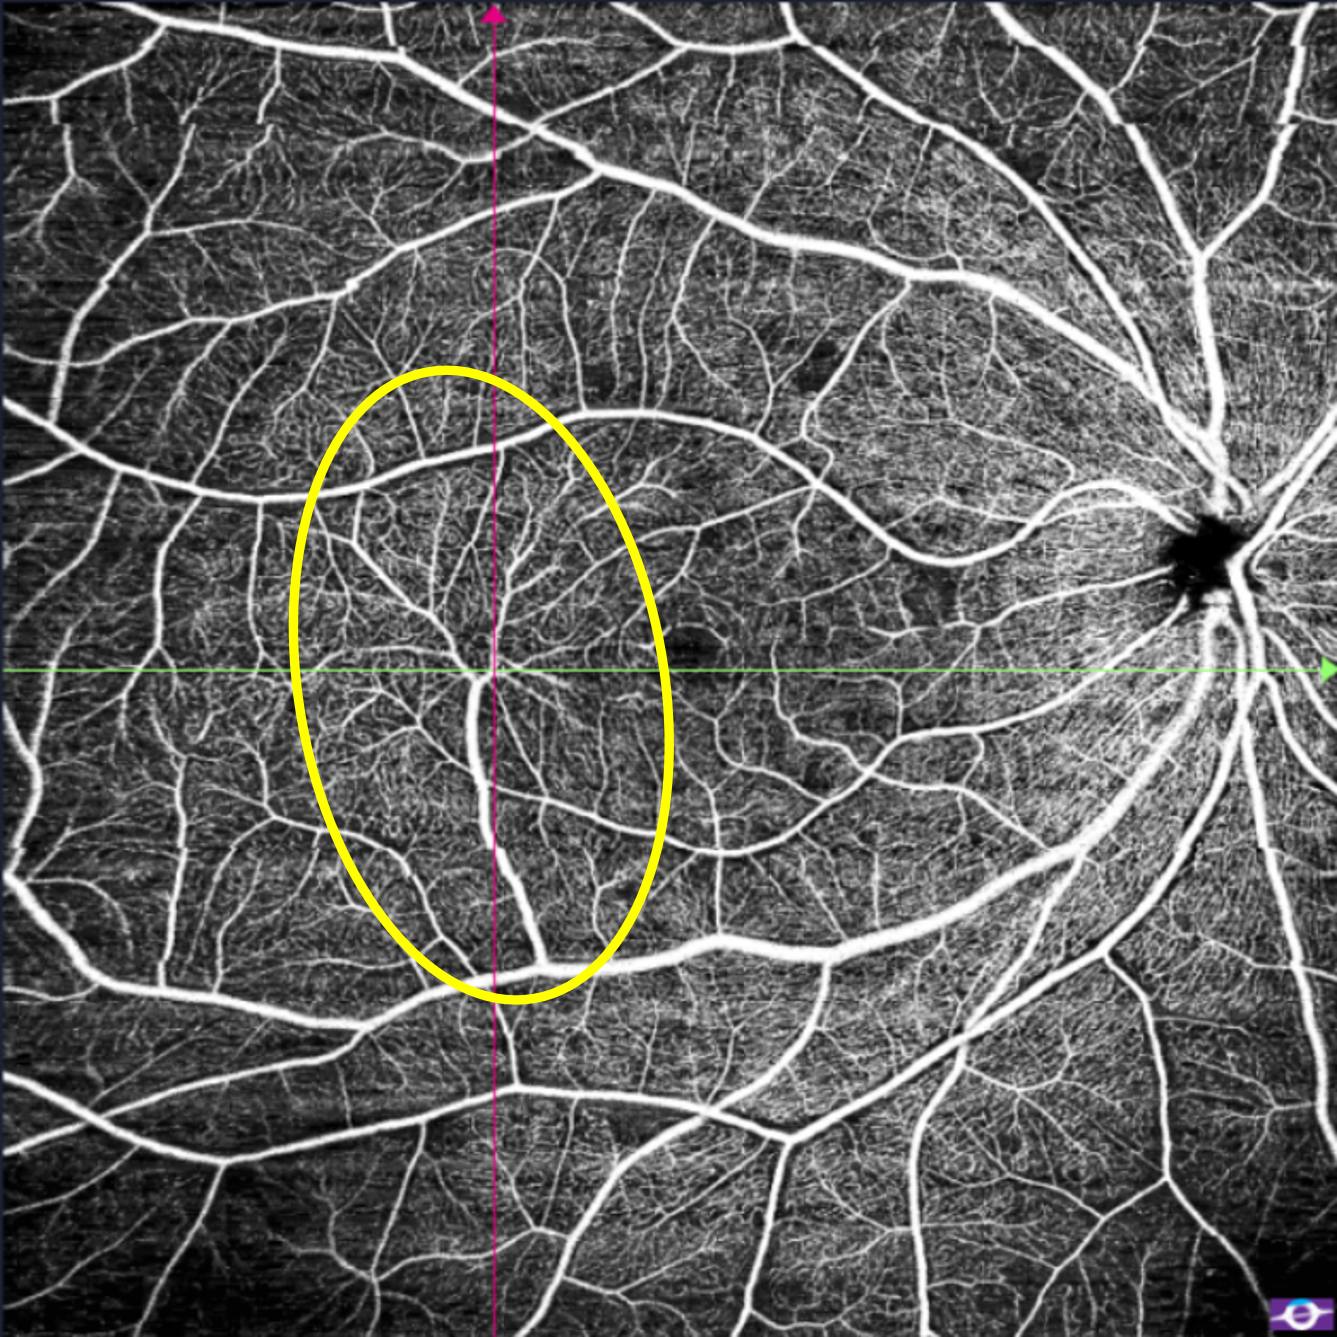 Congenital Retinal Microvessels, OCT Angiography